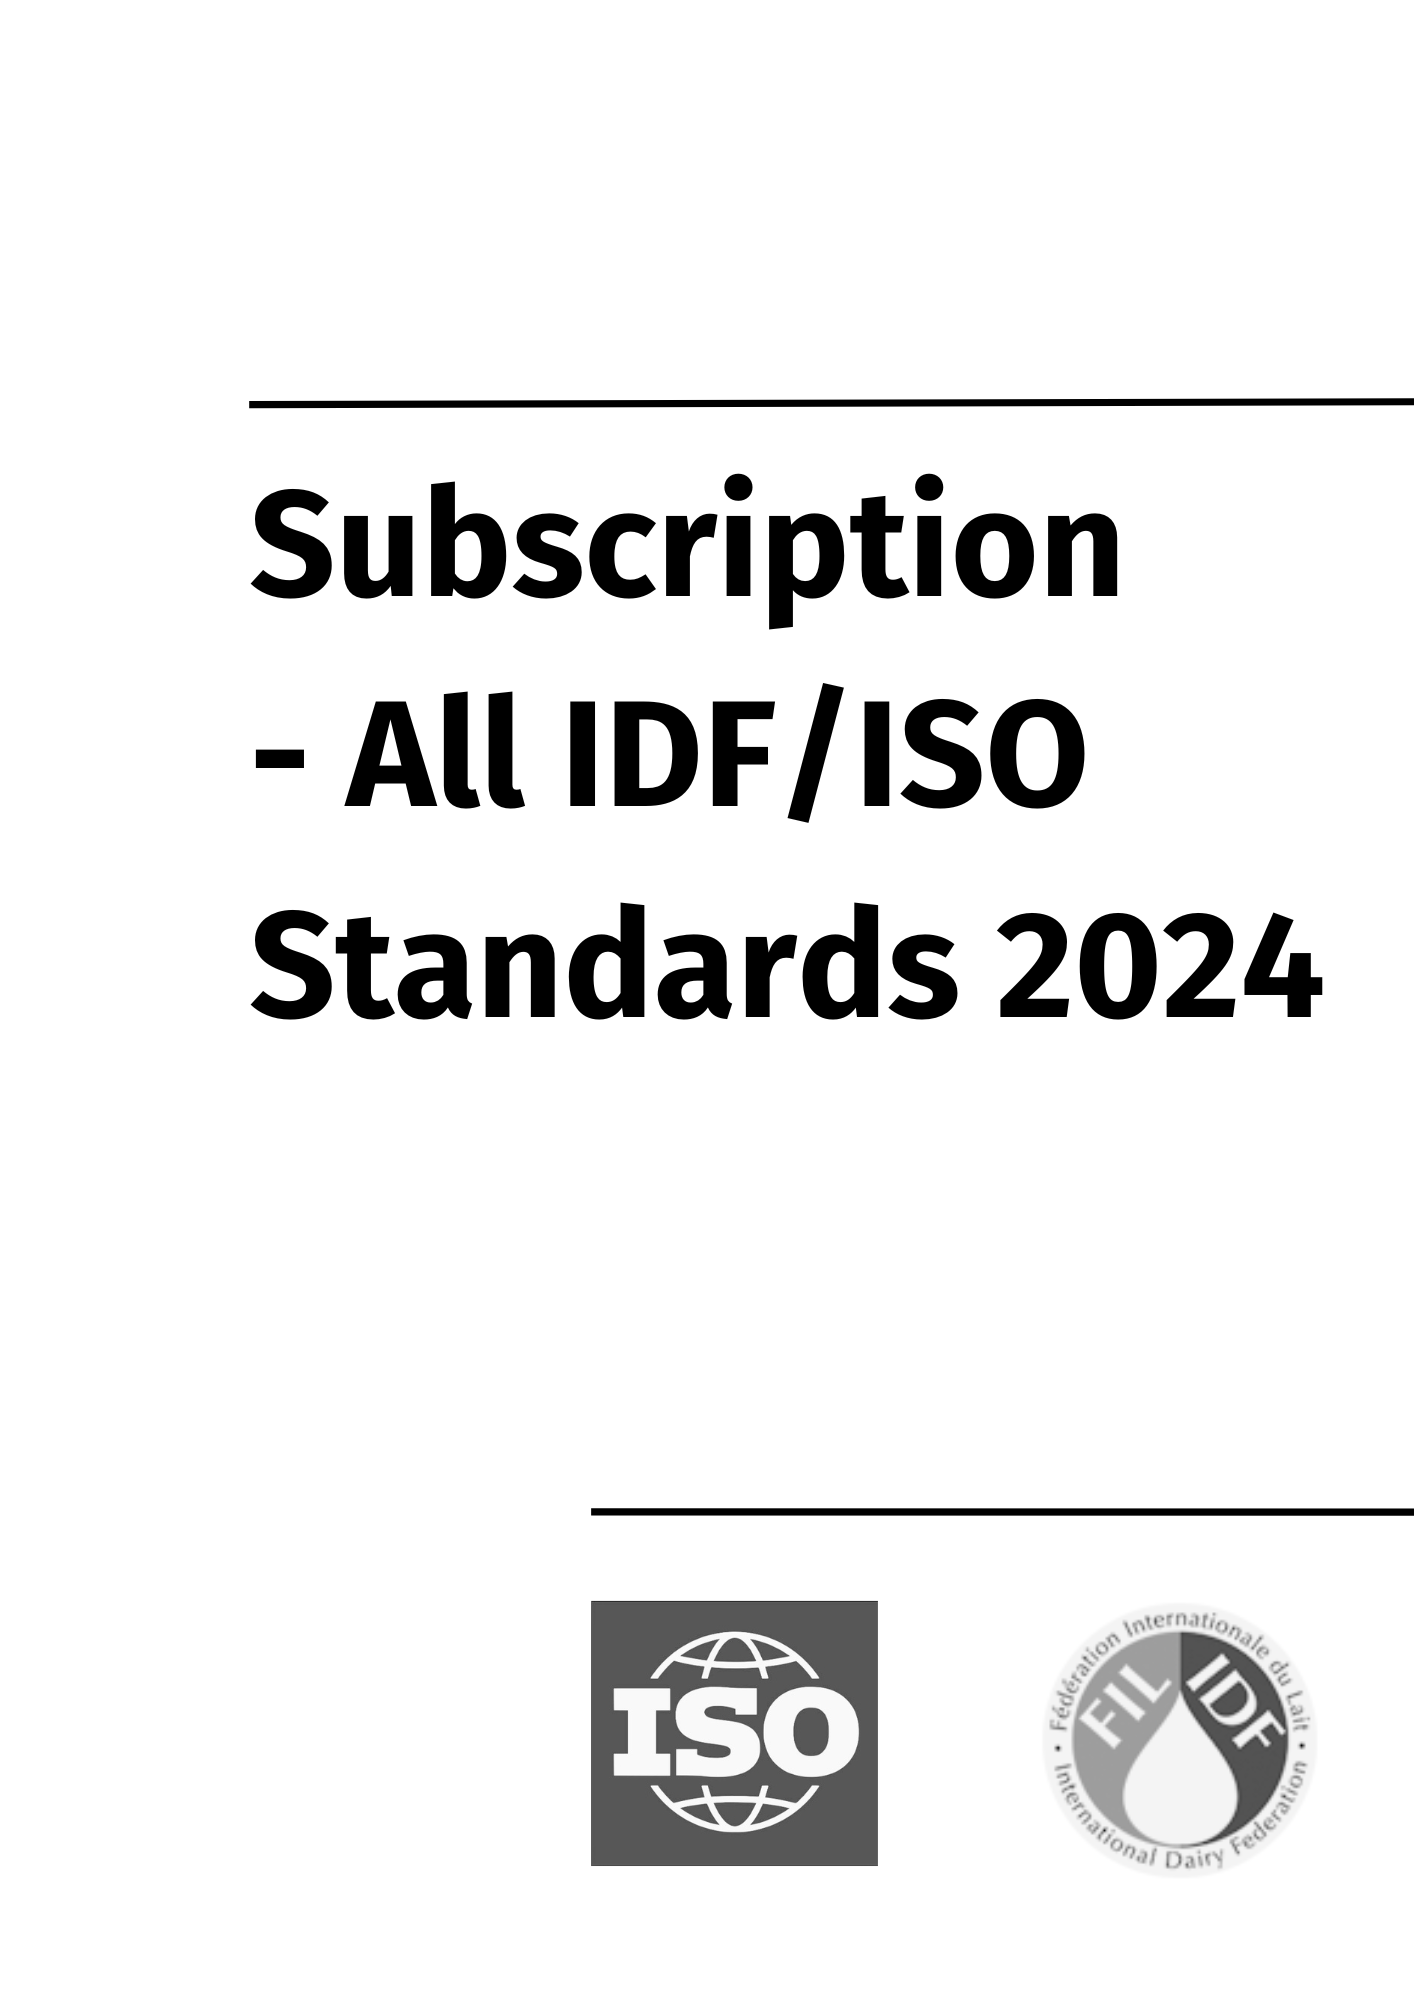 Subscription to all Standards of the IDF 2024 - FIL-IDF